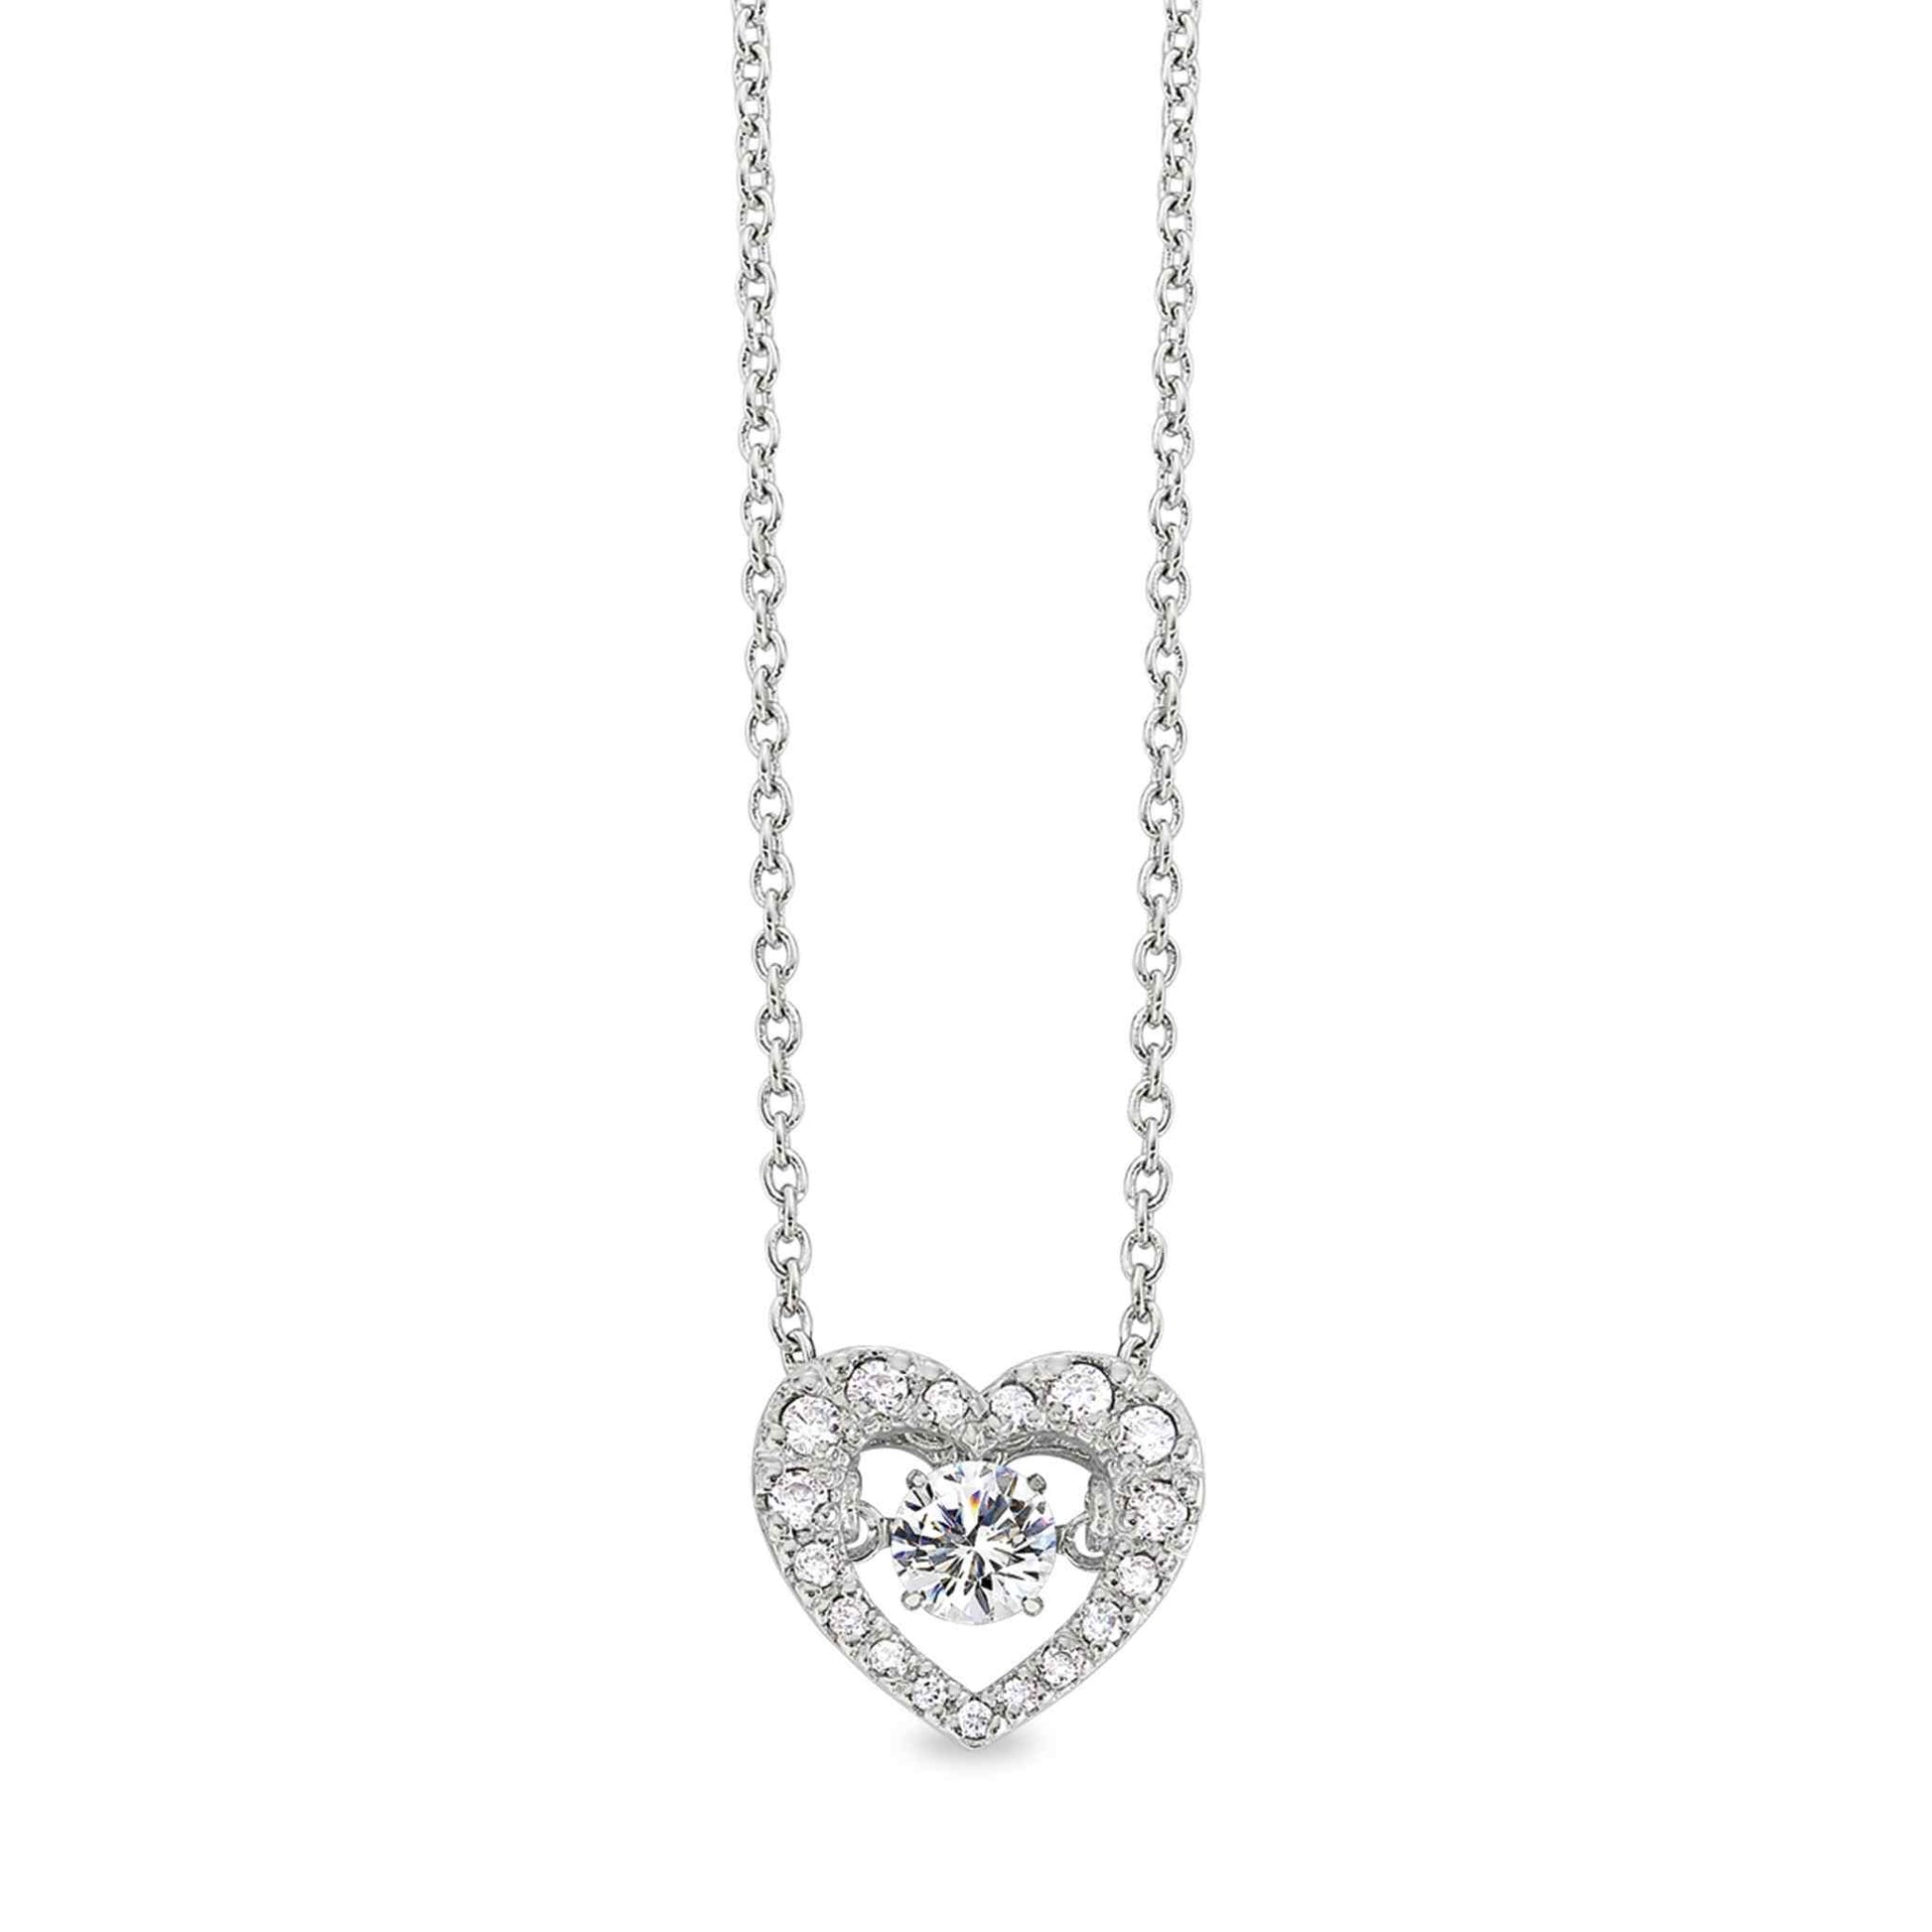 A dancing stone heart necklace with simulated diamonds displayed on a neutral white background.